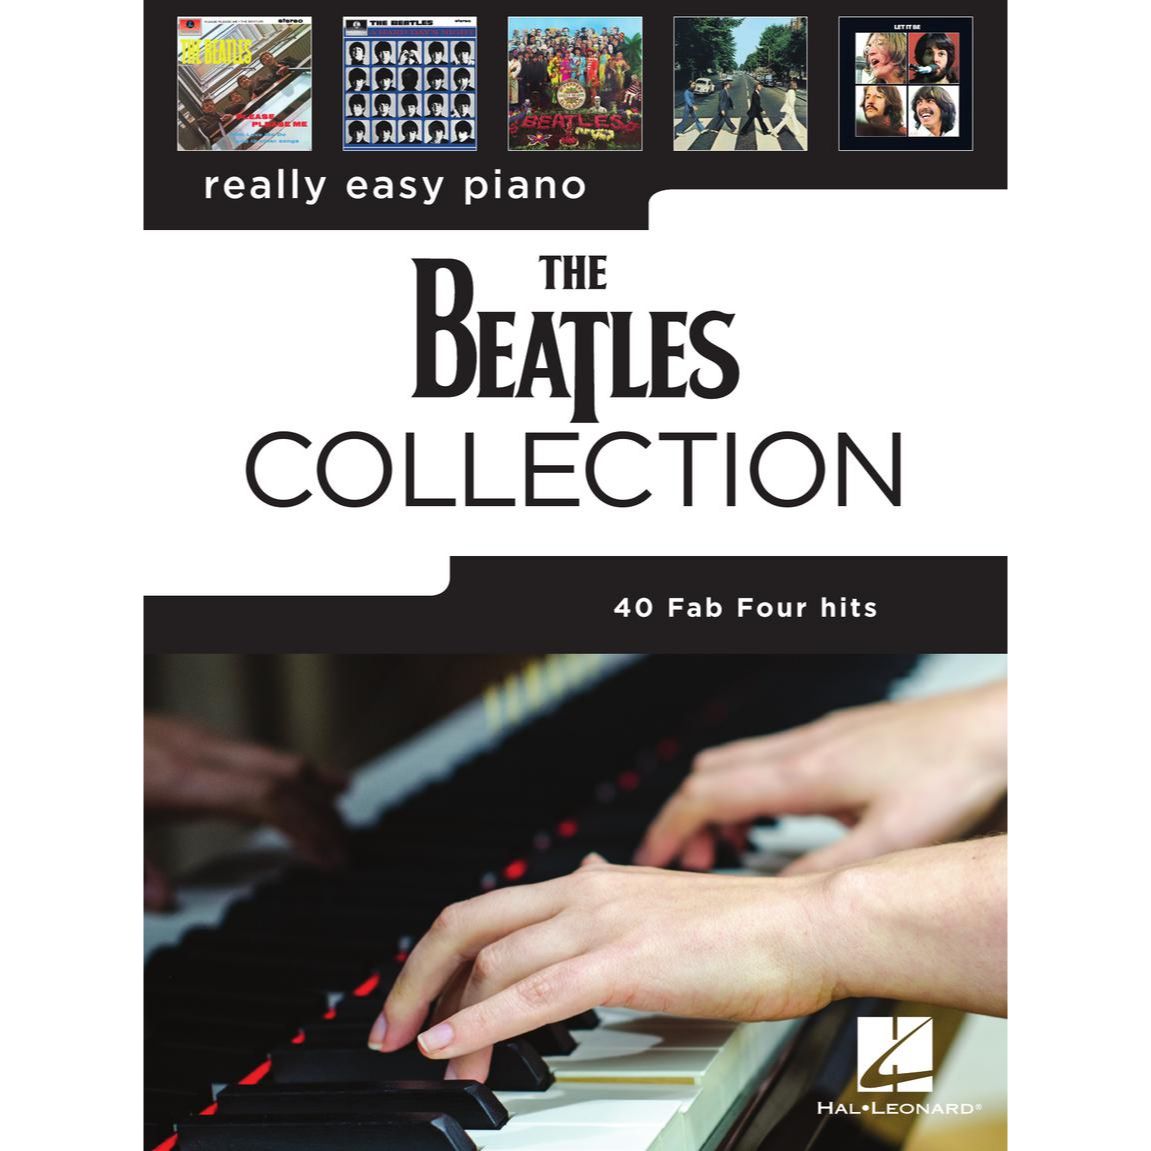 Really Easy Piano - The Beatles Collection (40 Fab Four Hits)